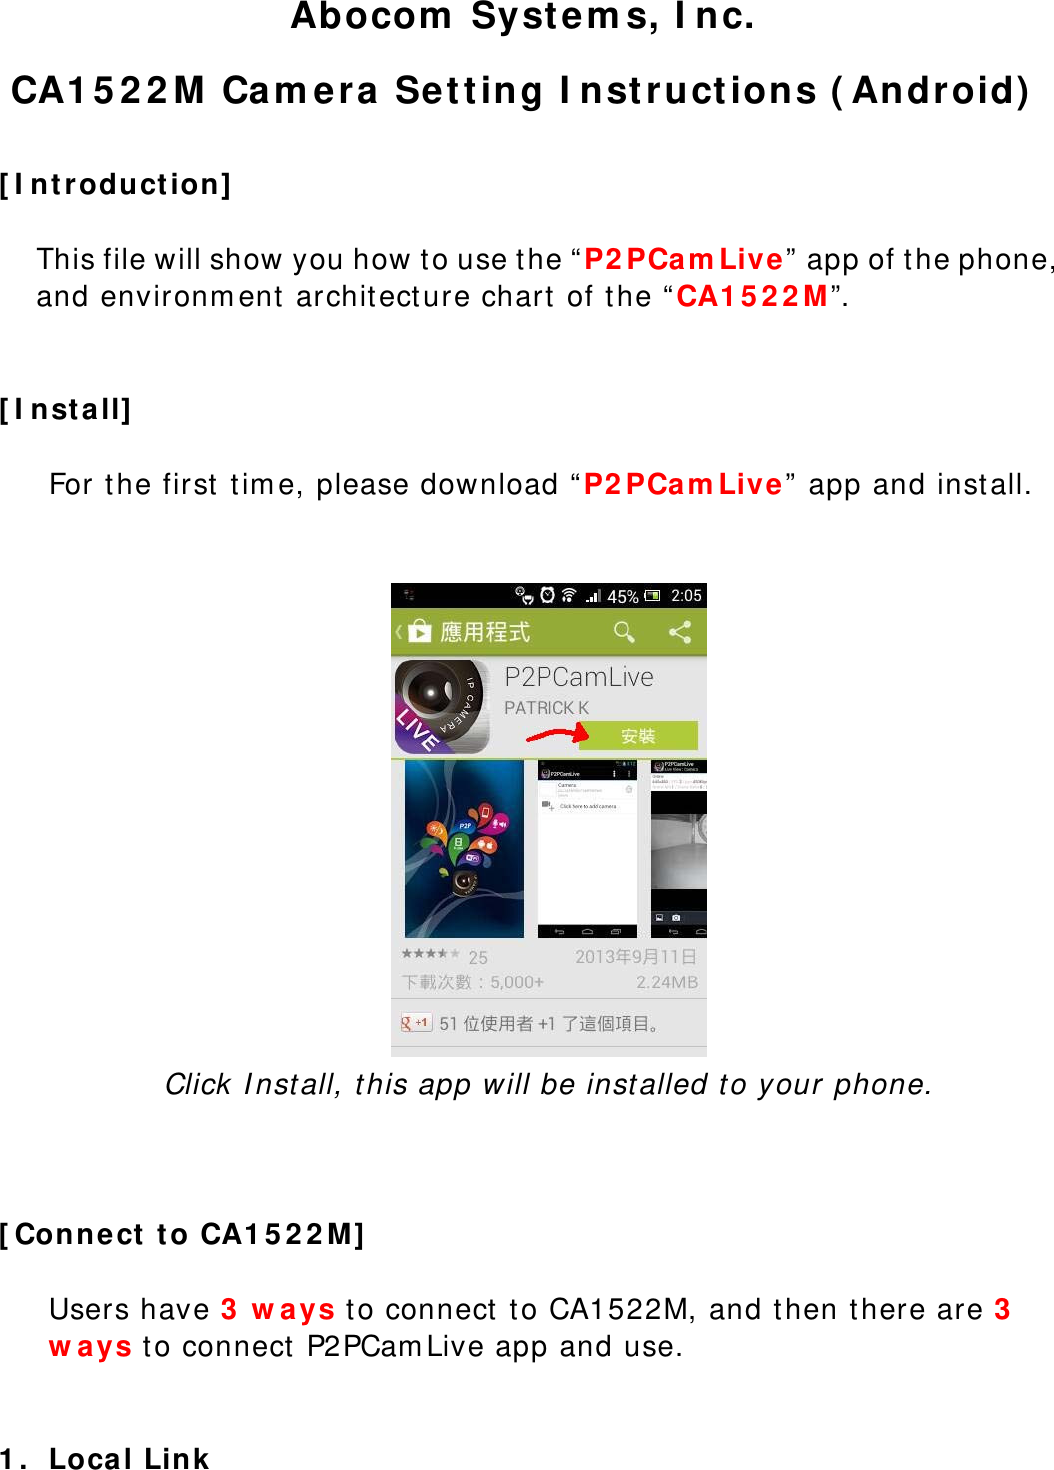 Abocom Systems, Inc. CA1522M Camera Setting Instructions (Android)  [Introduction]  This file will show you how to use the “P2PCamLive” app of the phone, and environment architecture chart of the “CA1522M”.   [Install]  For the first time, please download “P2PCamLive” app and install.    Click Install, this app will be installed to your phone.    [Connect to CA1522M]  Users have 3 ways to connect to CA1522M, and then there are 3 ways to connect P2PCamLive app and use.    1. Local Link 